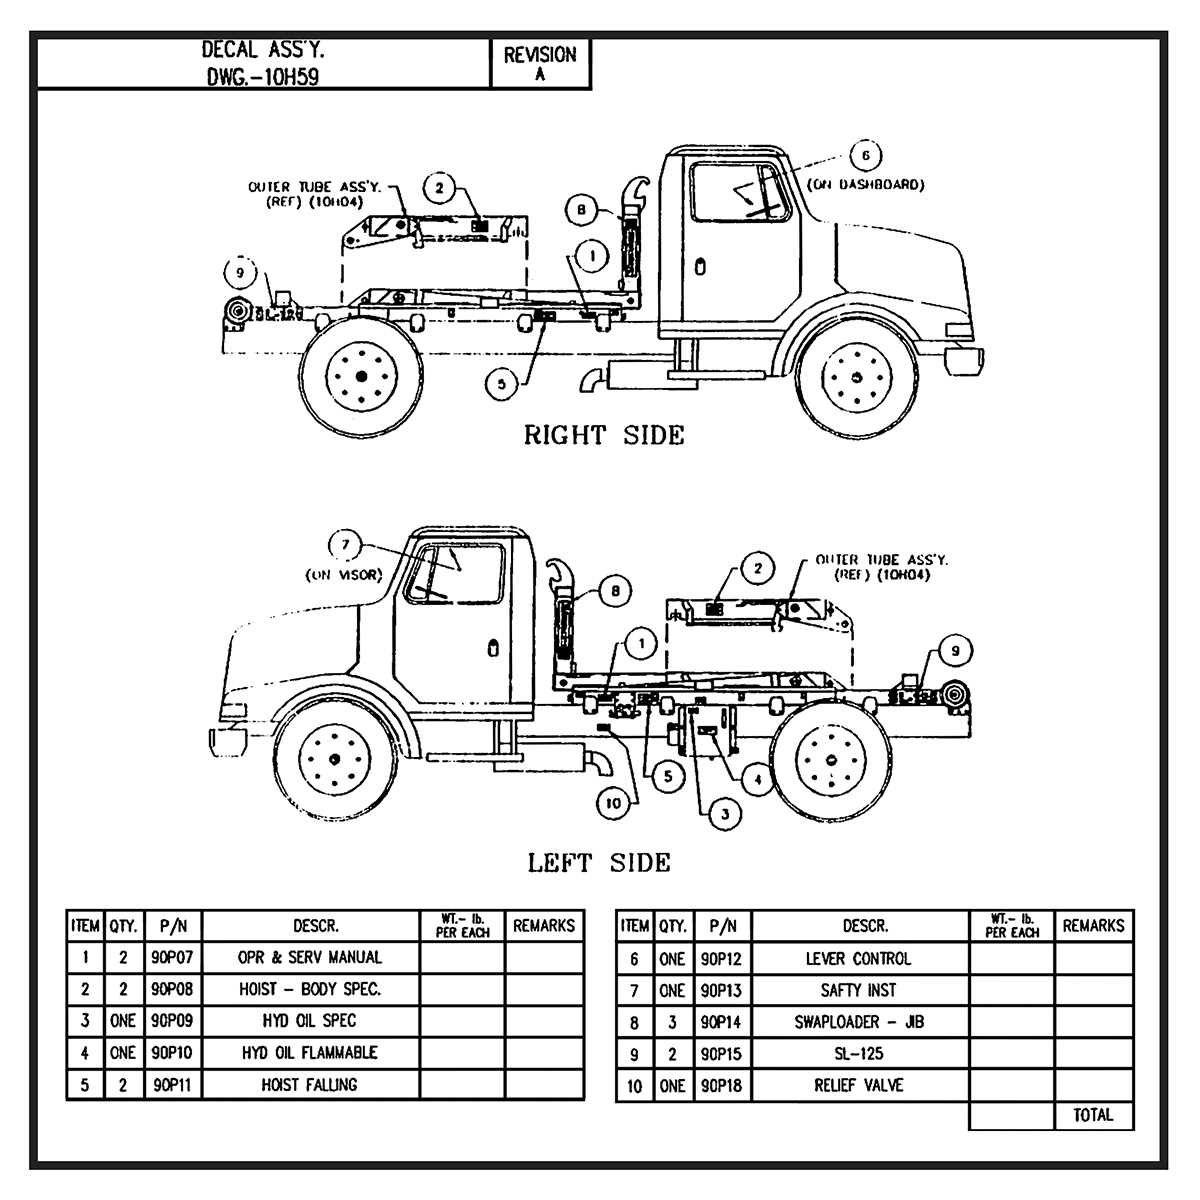 Swaploader SL-125 Decal Assembly Diagram